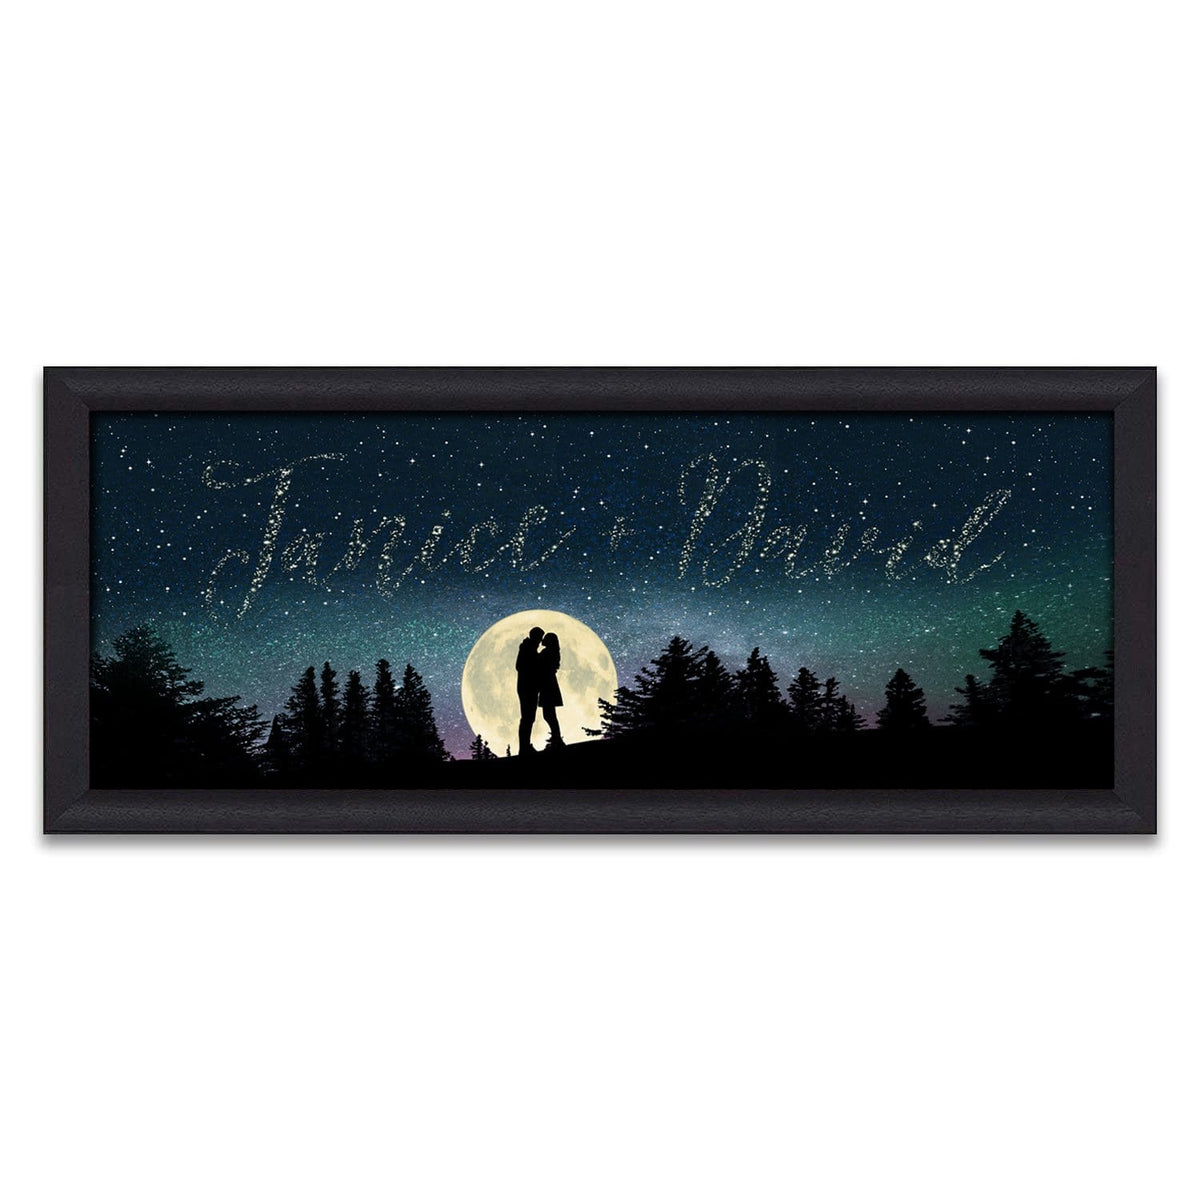 Written in the stars - Romantic Personalized Gift